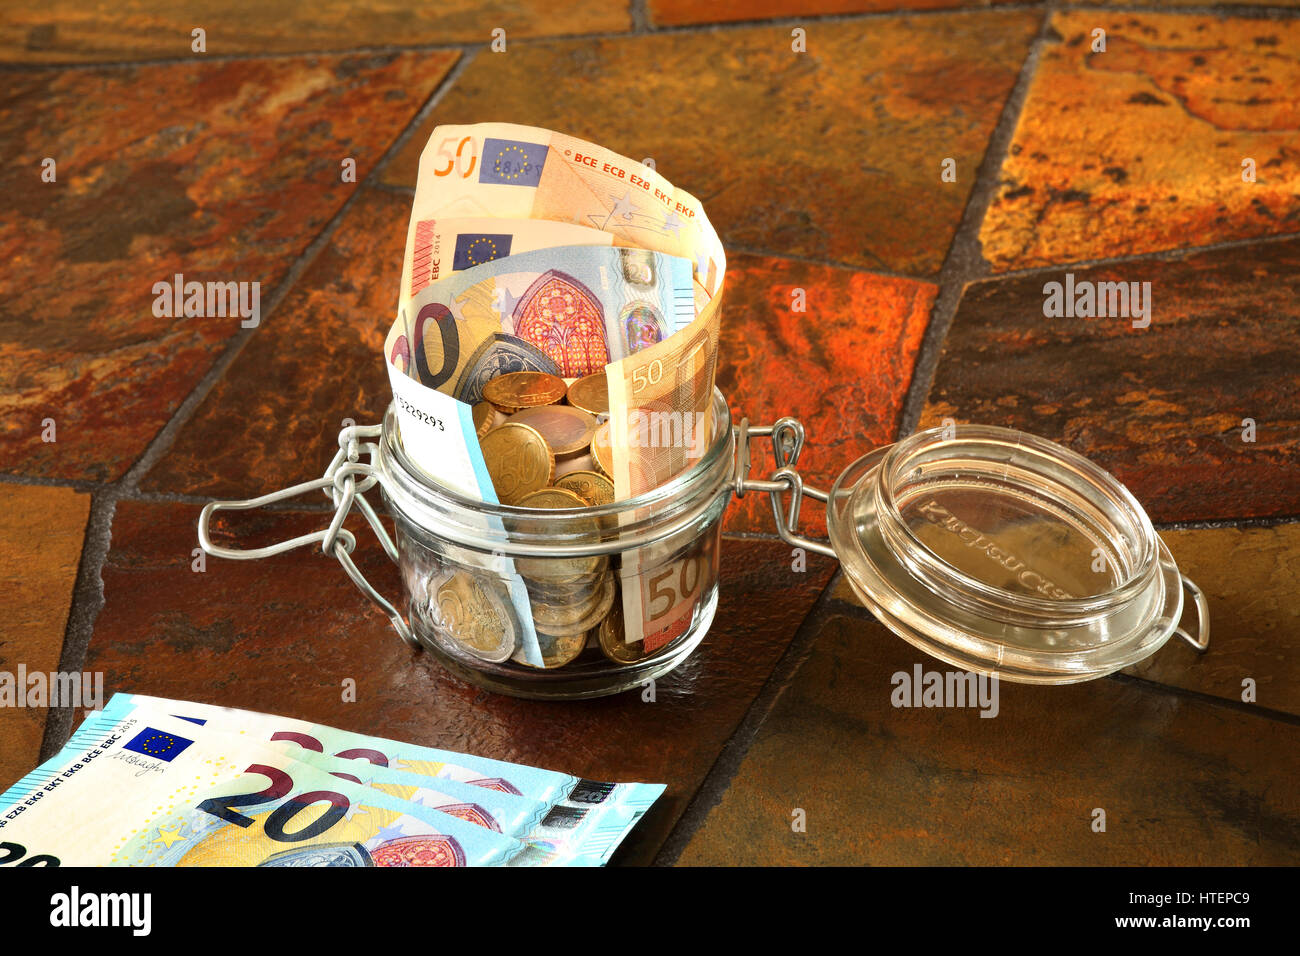 Euro banknotes and coins in a glass container with some banknotes in the left hand corner, all standing on a tiled table top Stock Photo